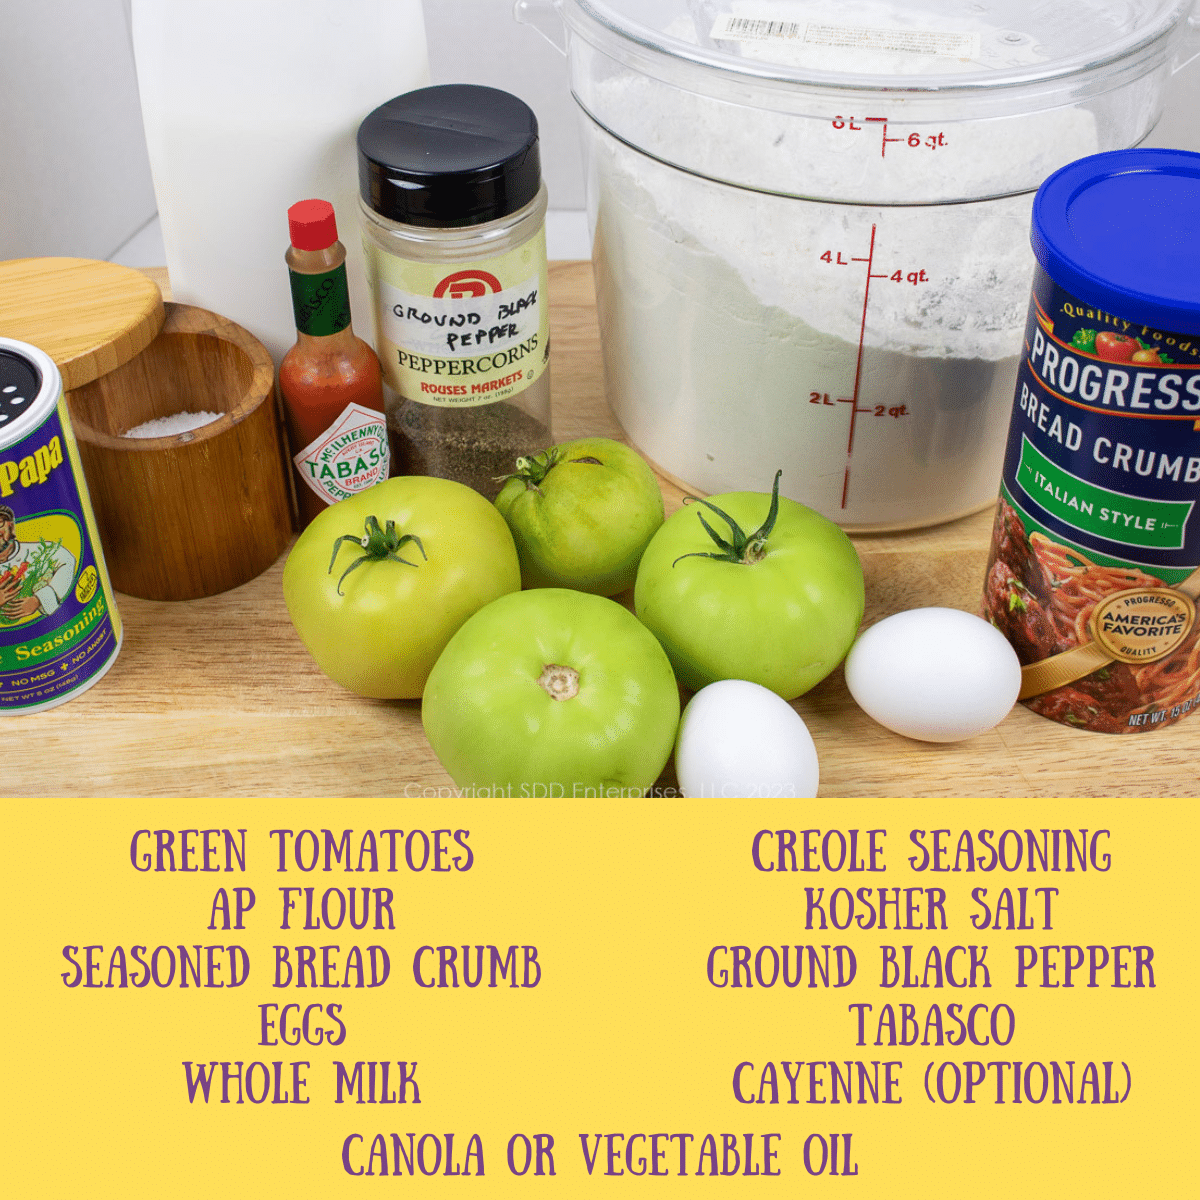 Ingredients for fried green tomatoes.